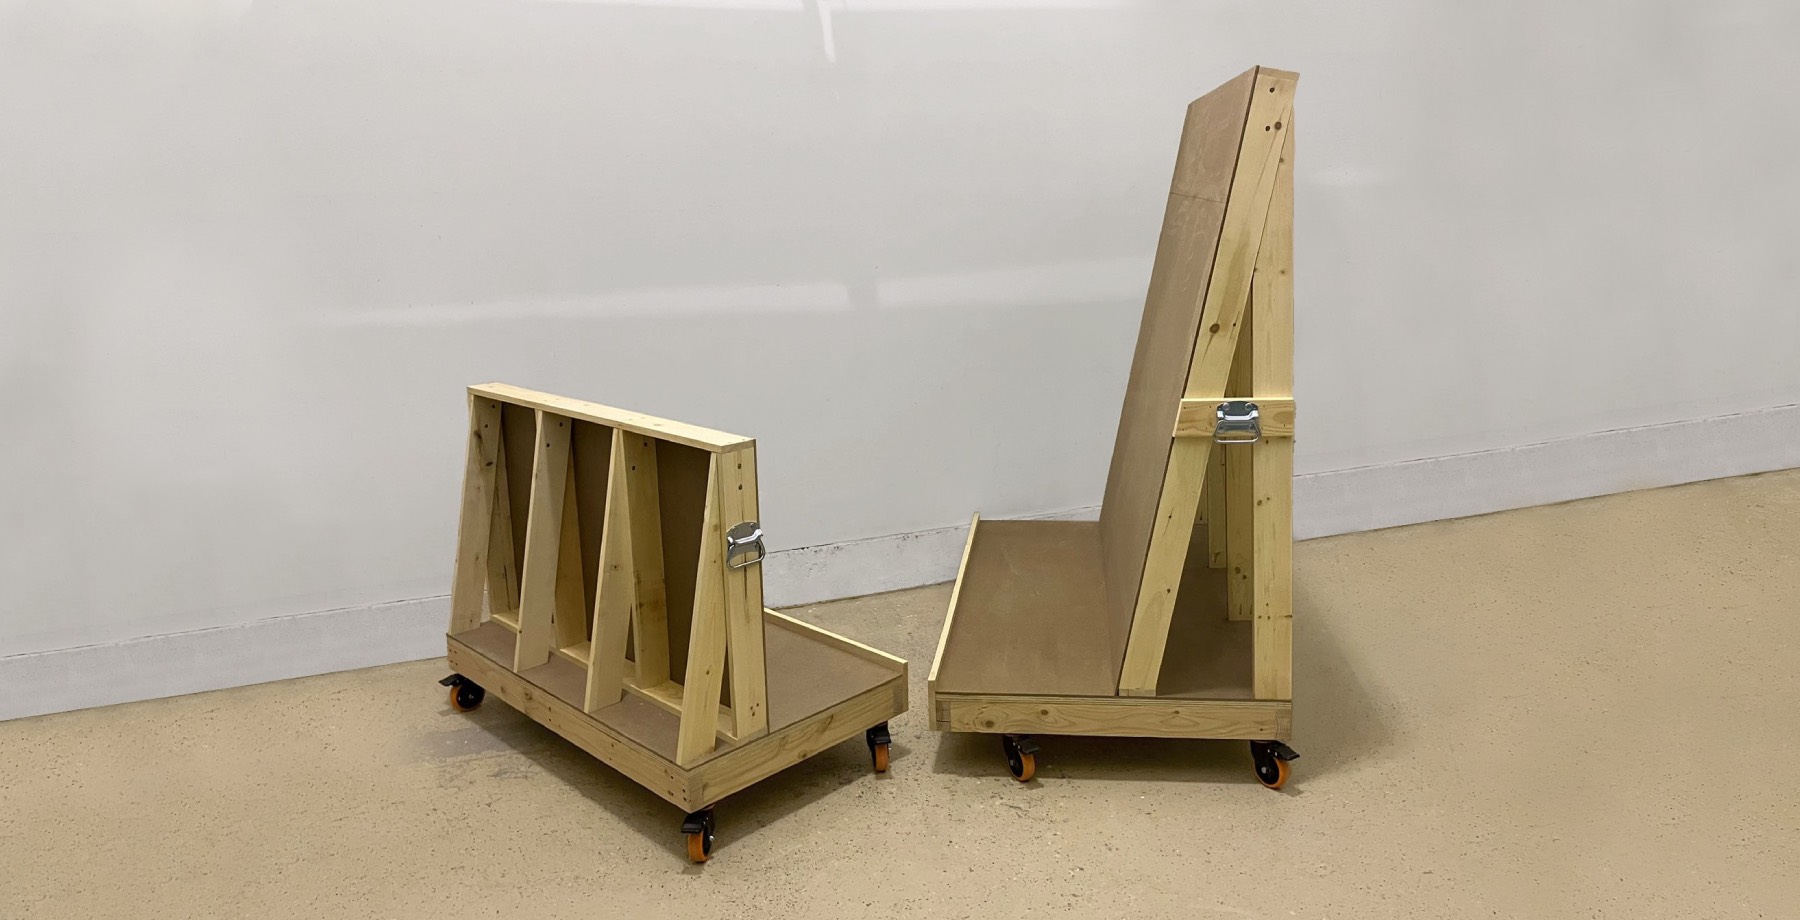 Two a-frames on casters made by Aconite